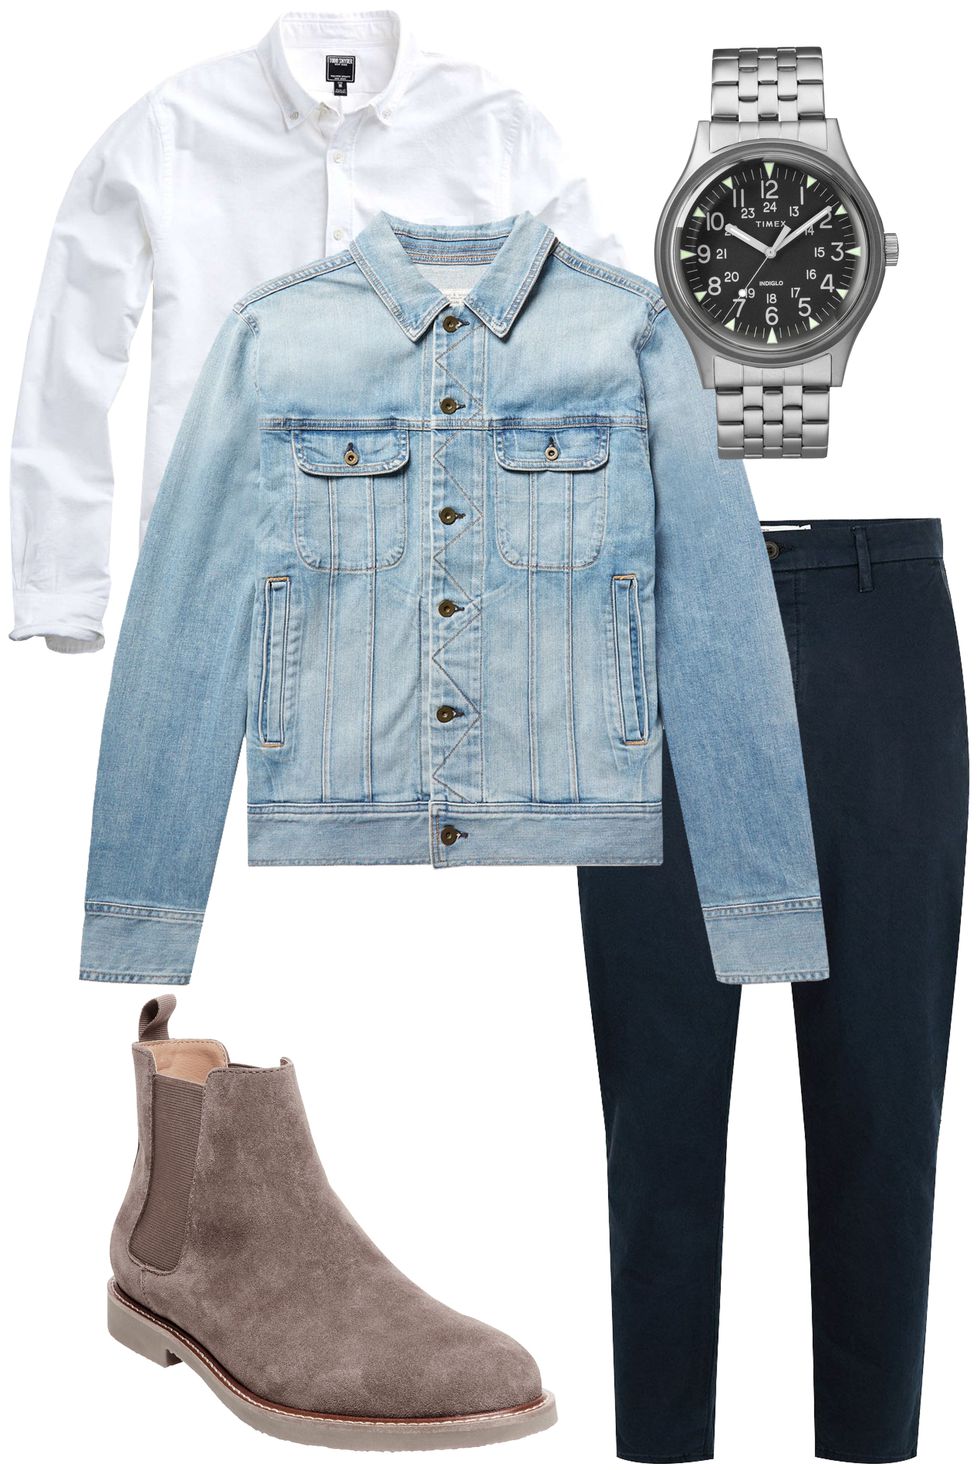 How to Wear a Jean Jacket for Men